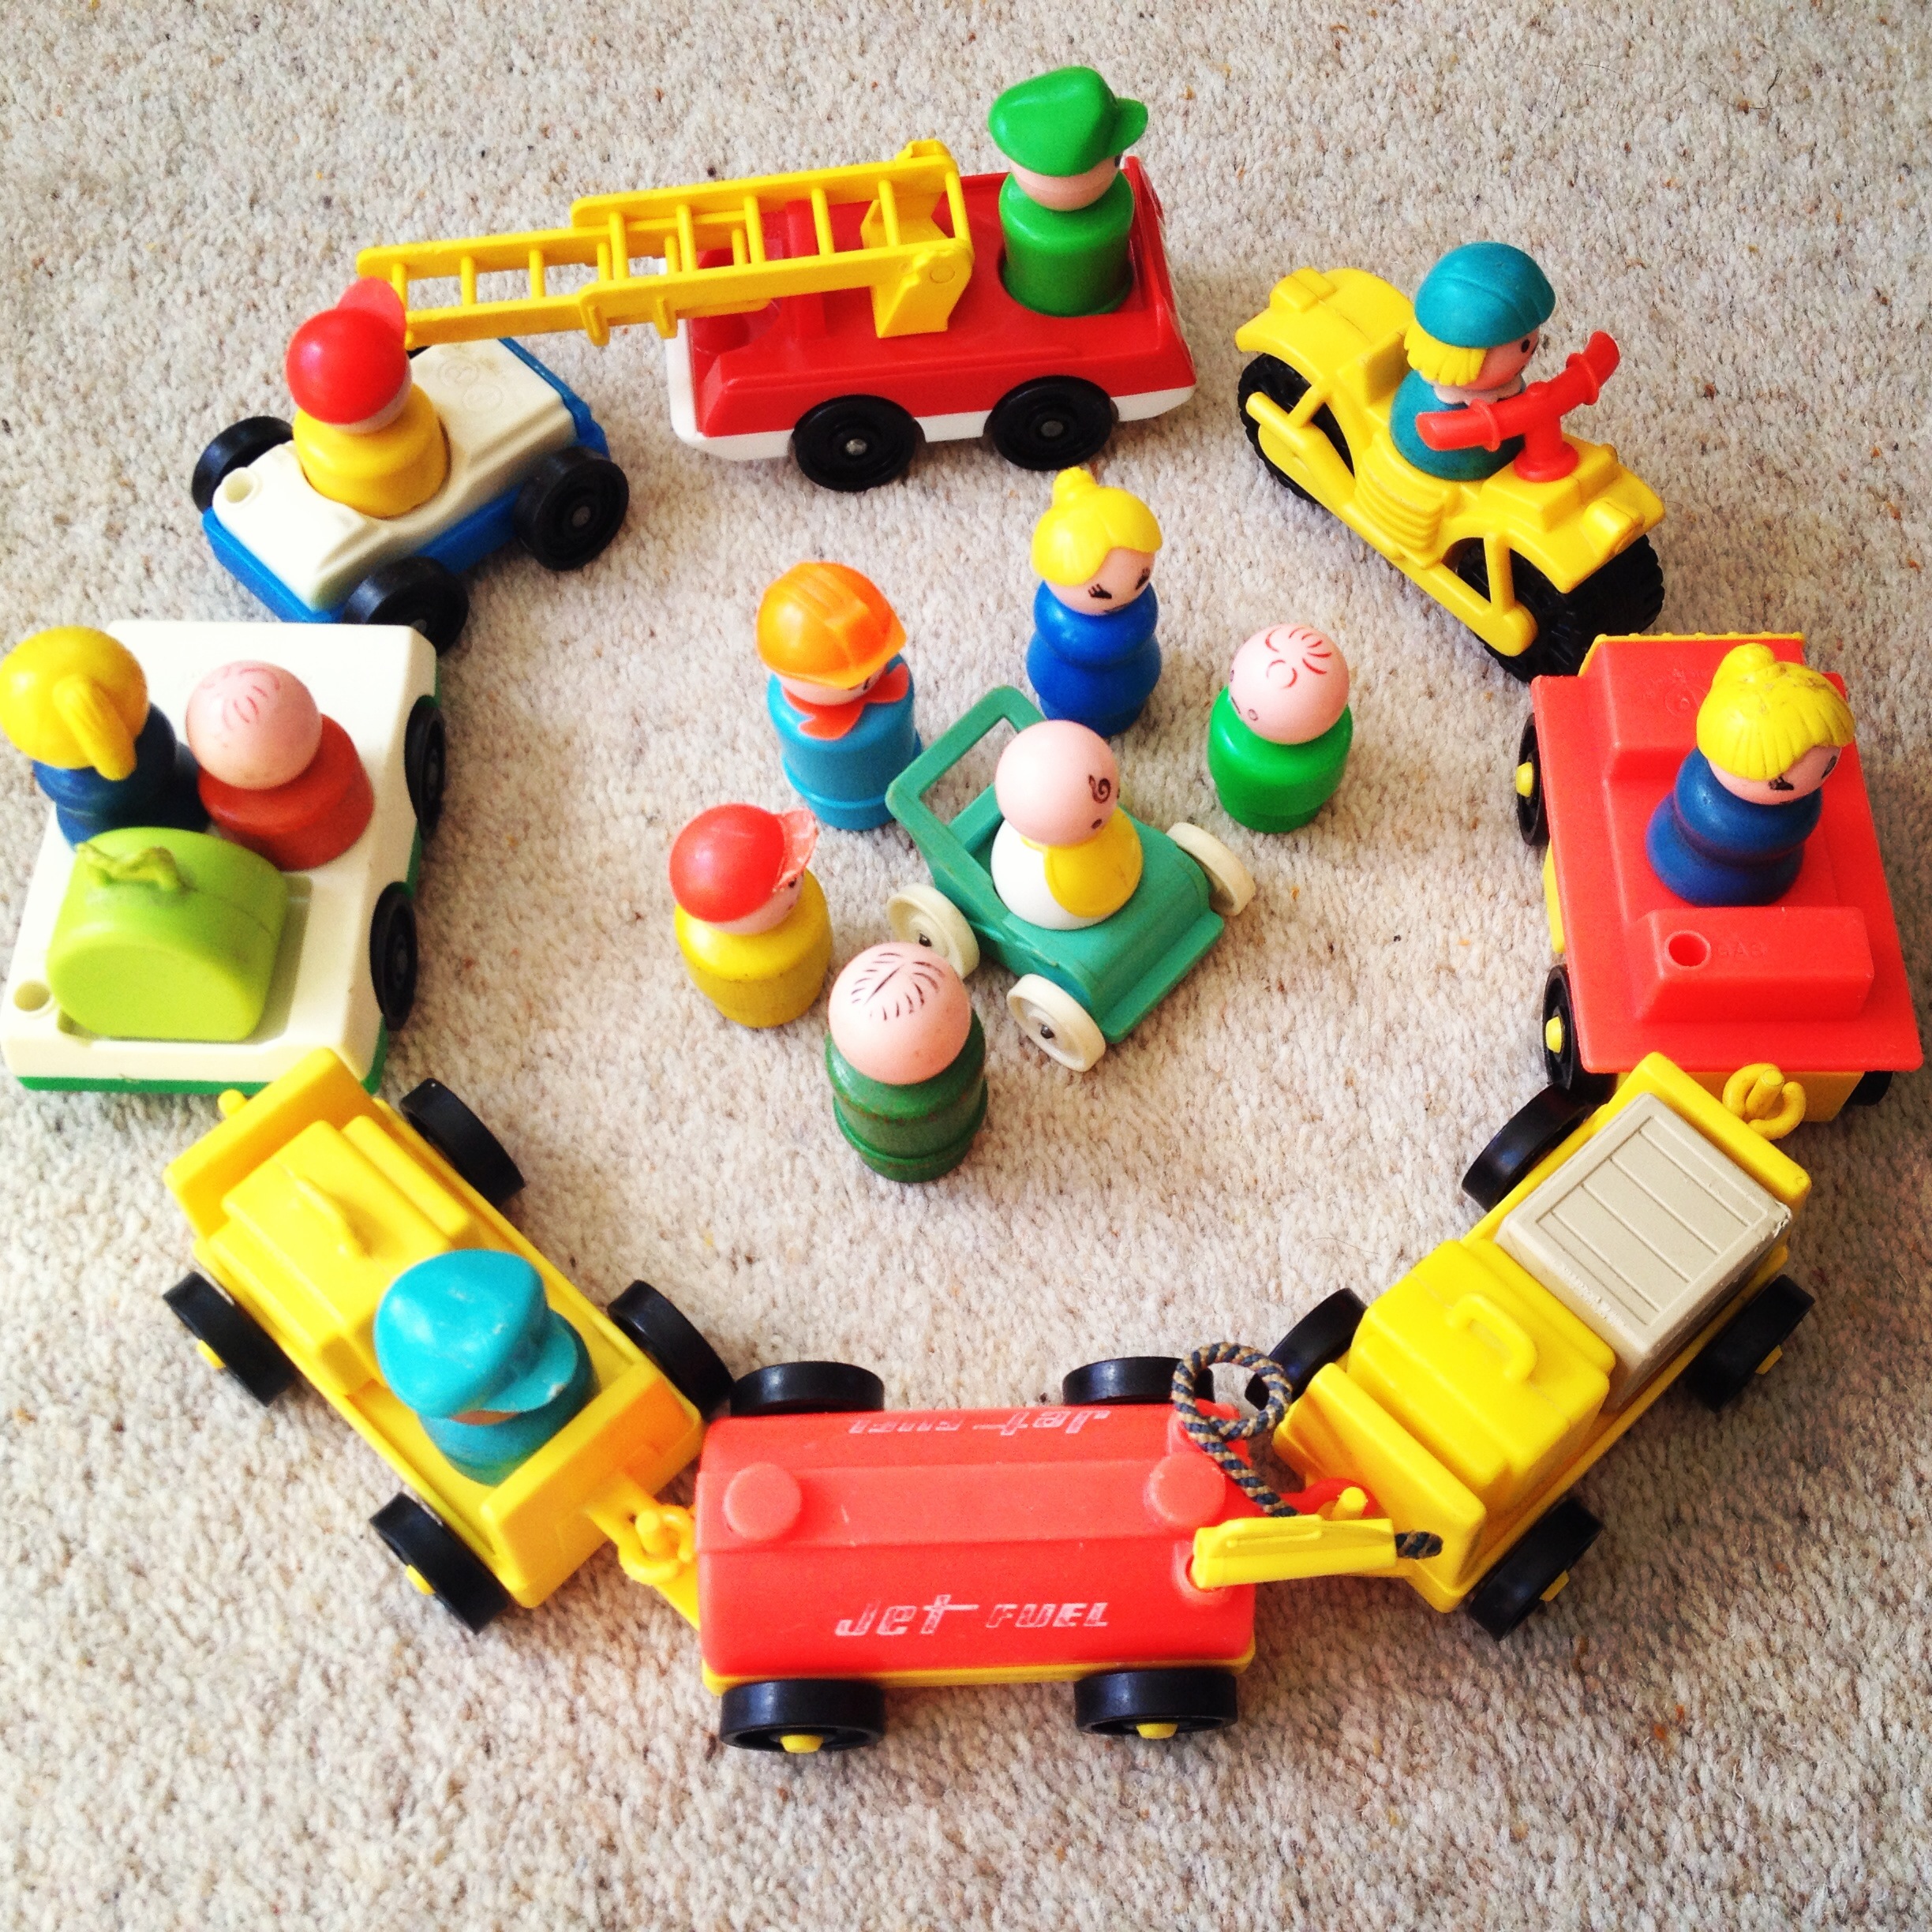 Name your Fisher Price - vintage childhood toys | A Baby on Board blog